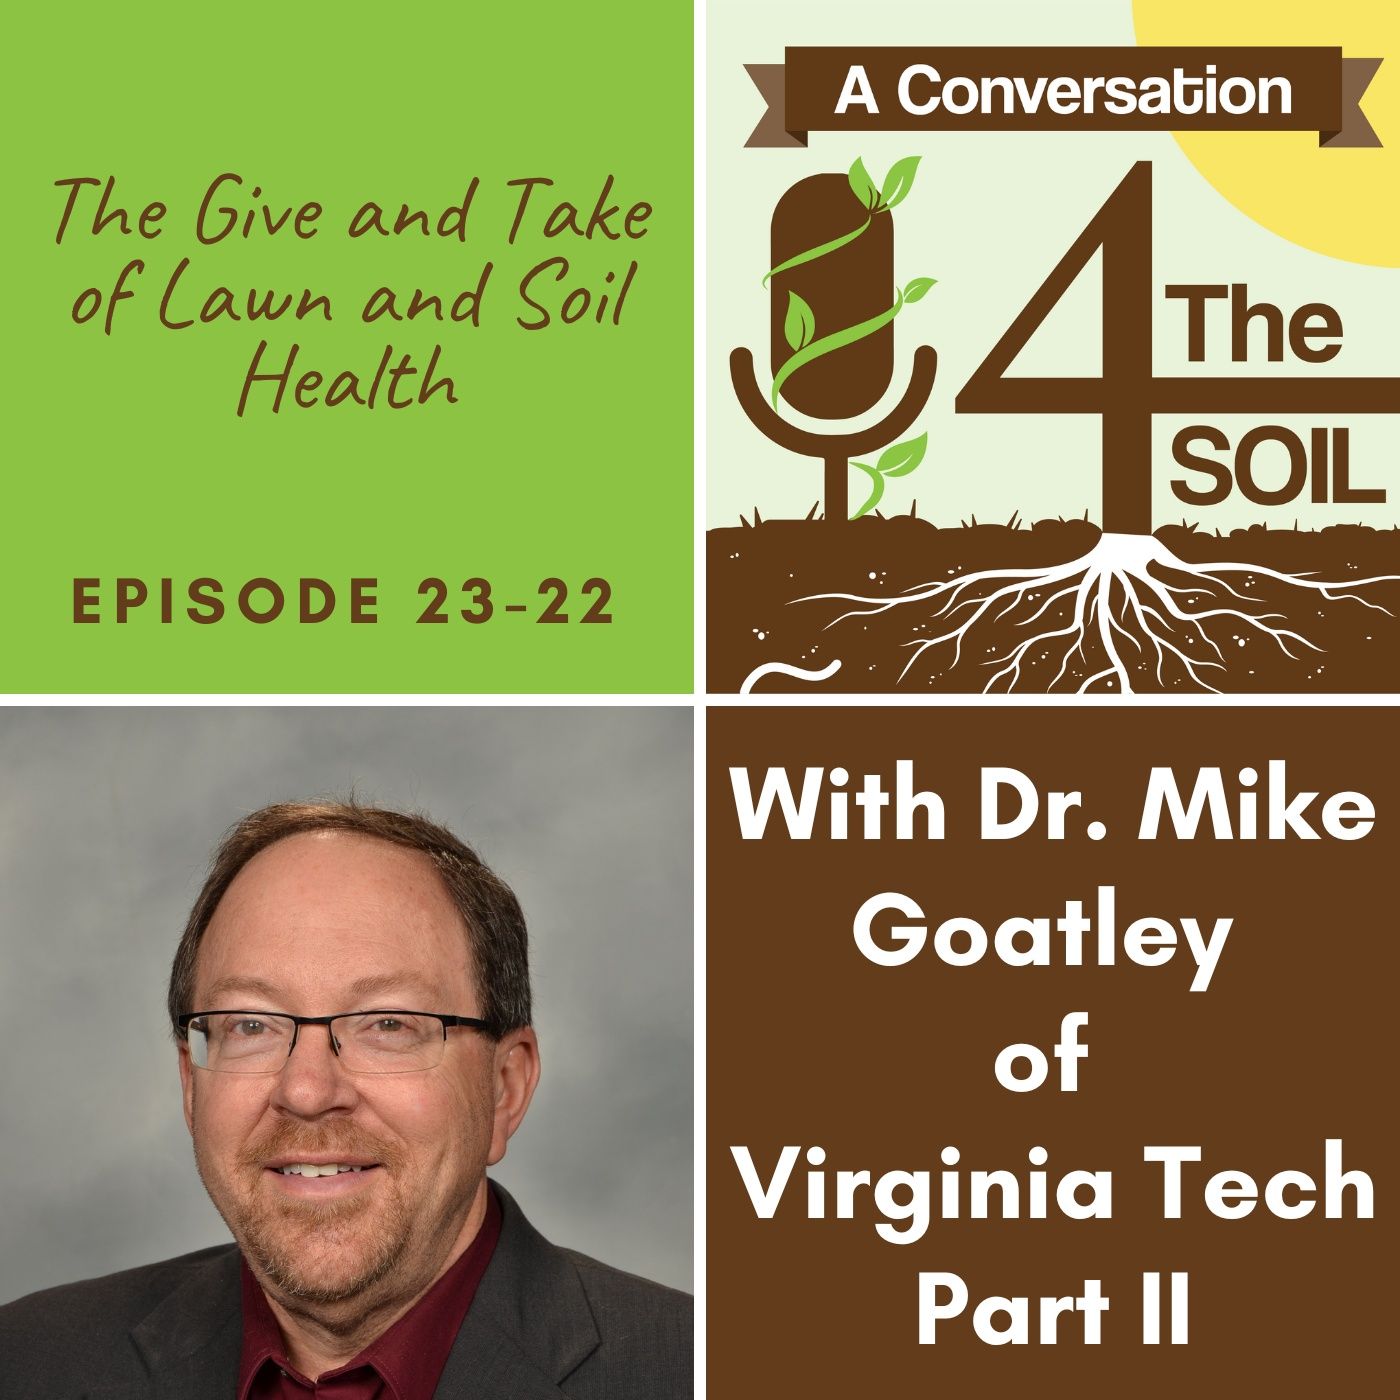 Episode 23 - 22: The Give and Take of Lawn and Soil Health with Dr. Mike Goatley of Virginia Tech Part II